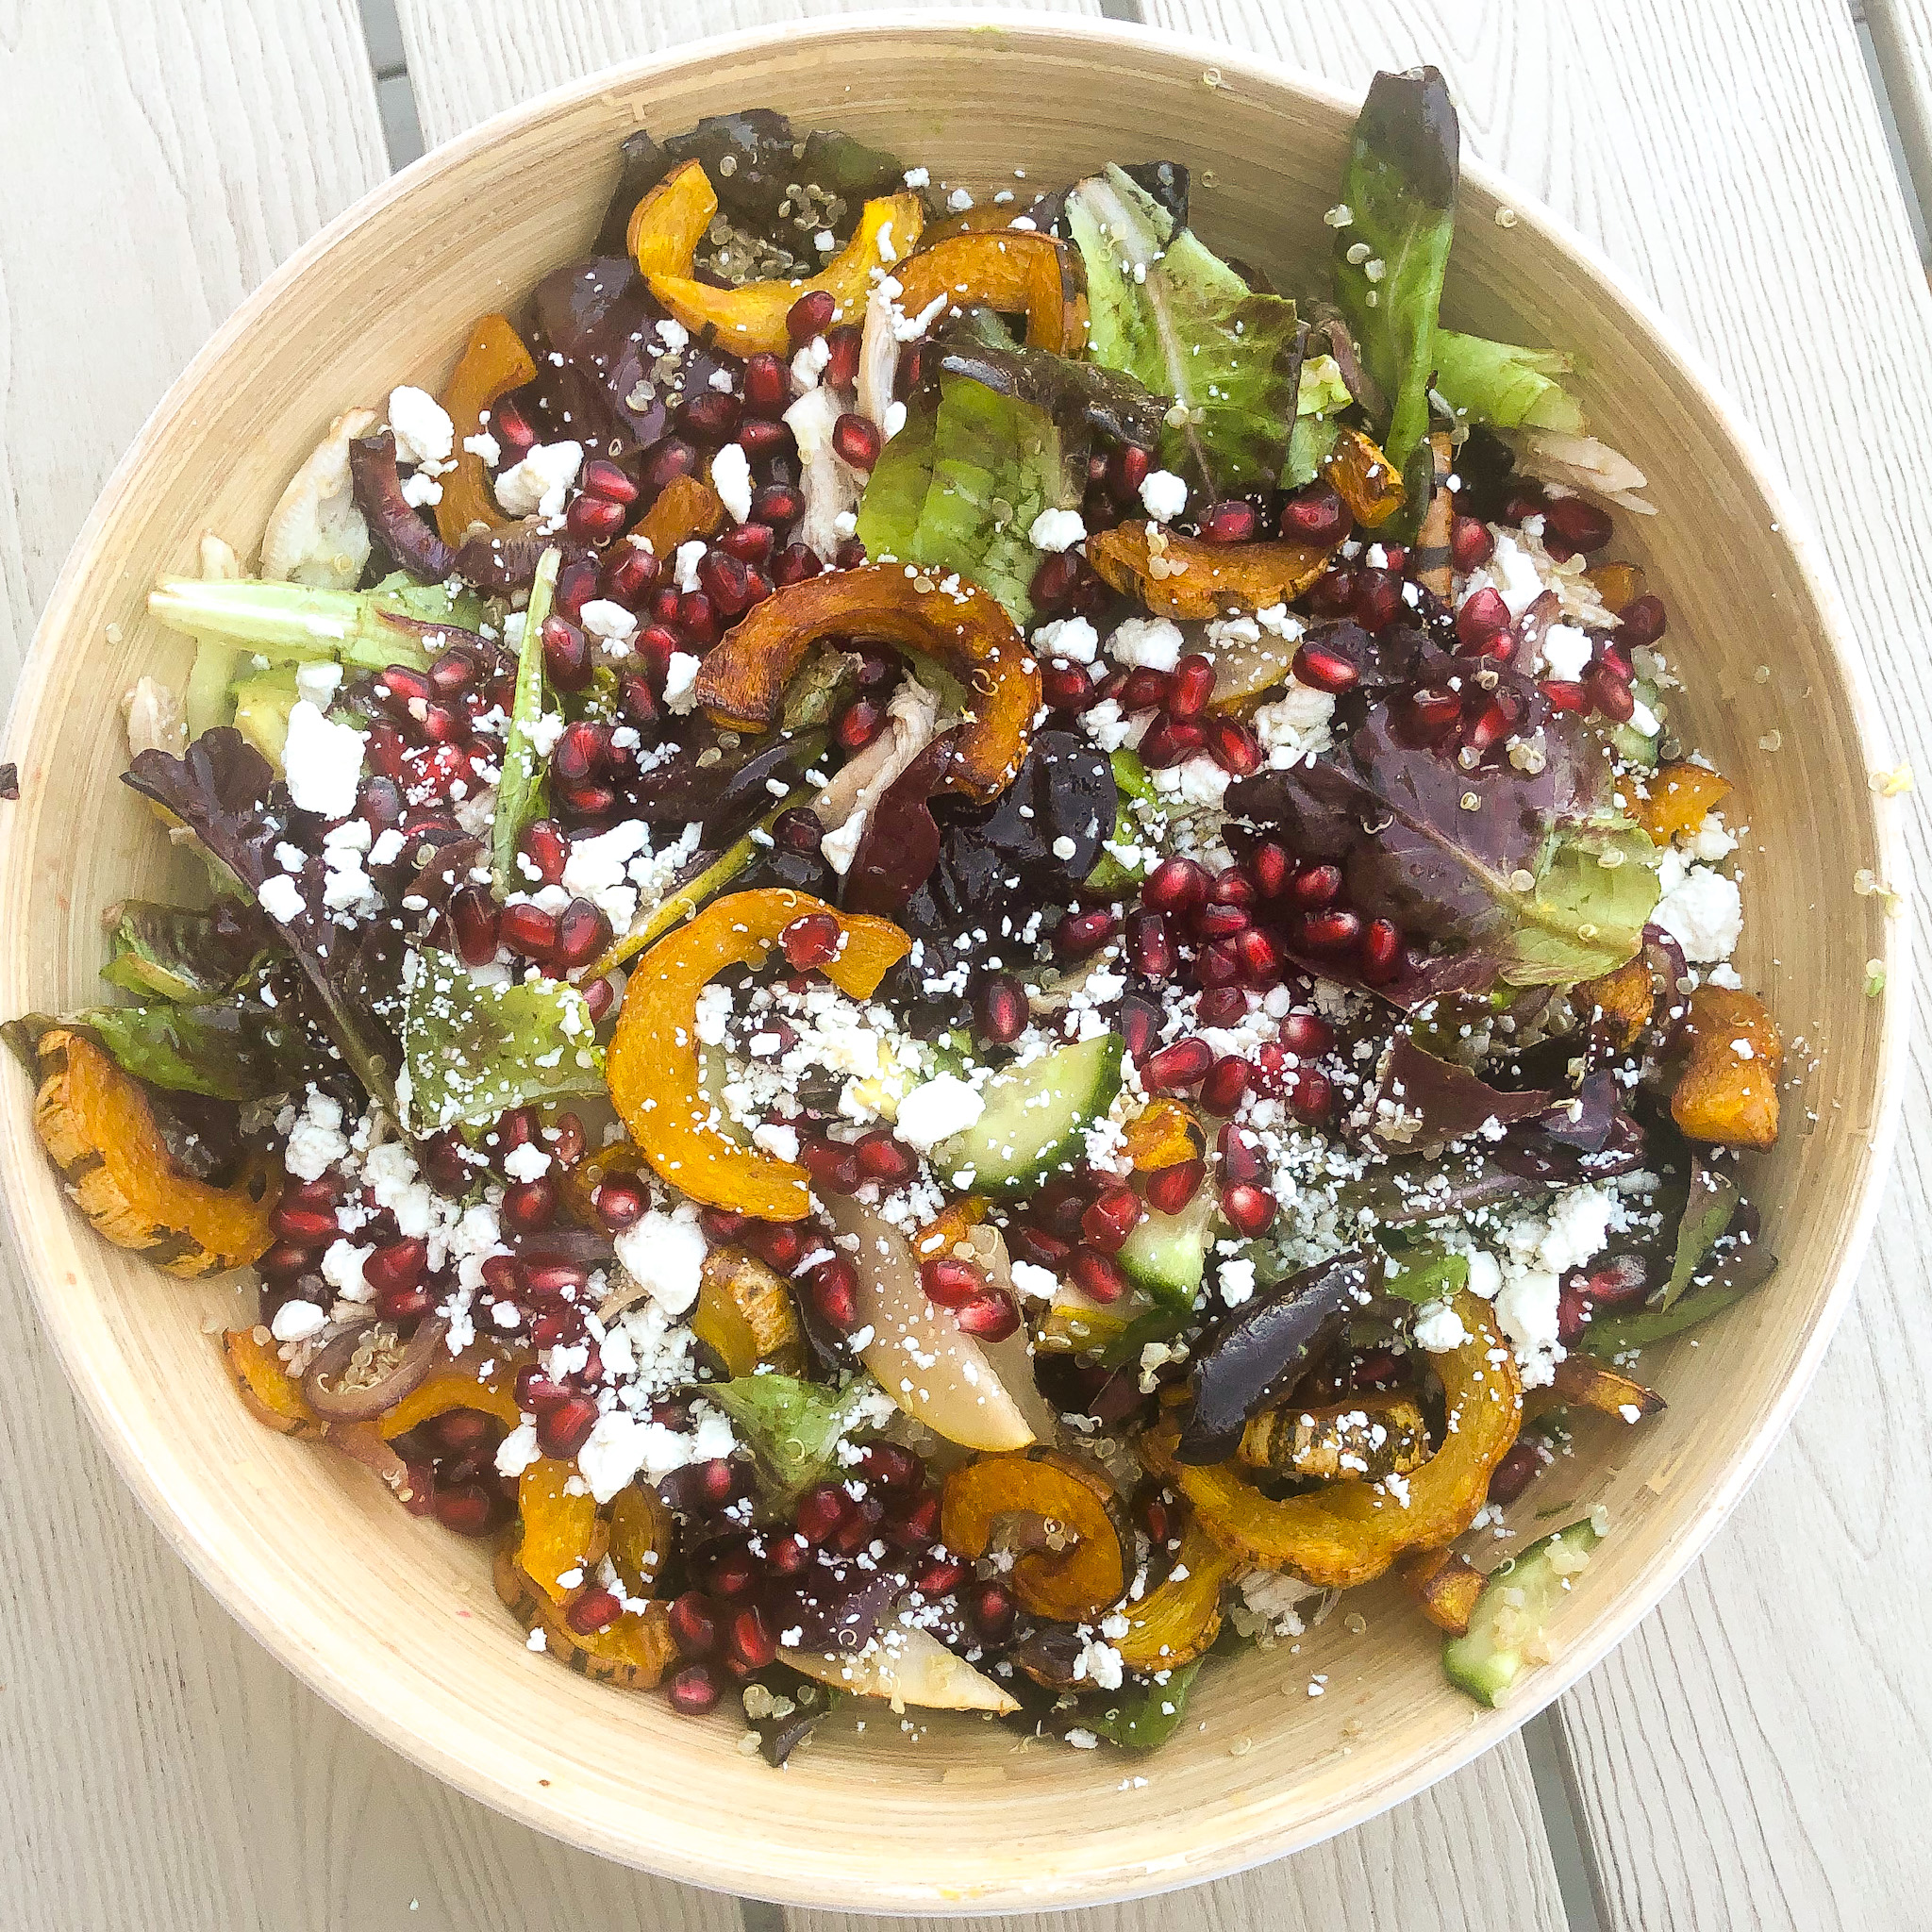 the finished fall squash salad, topped with pomegranate and goat cheese